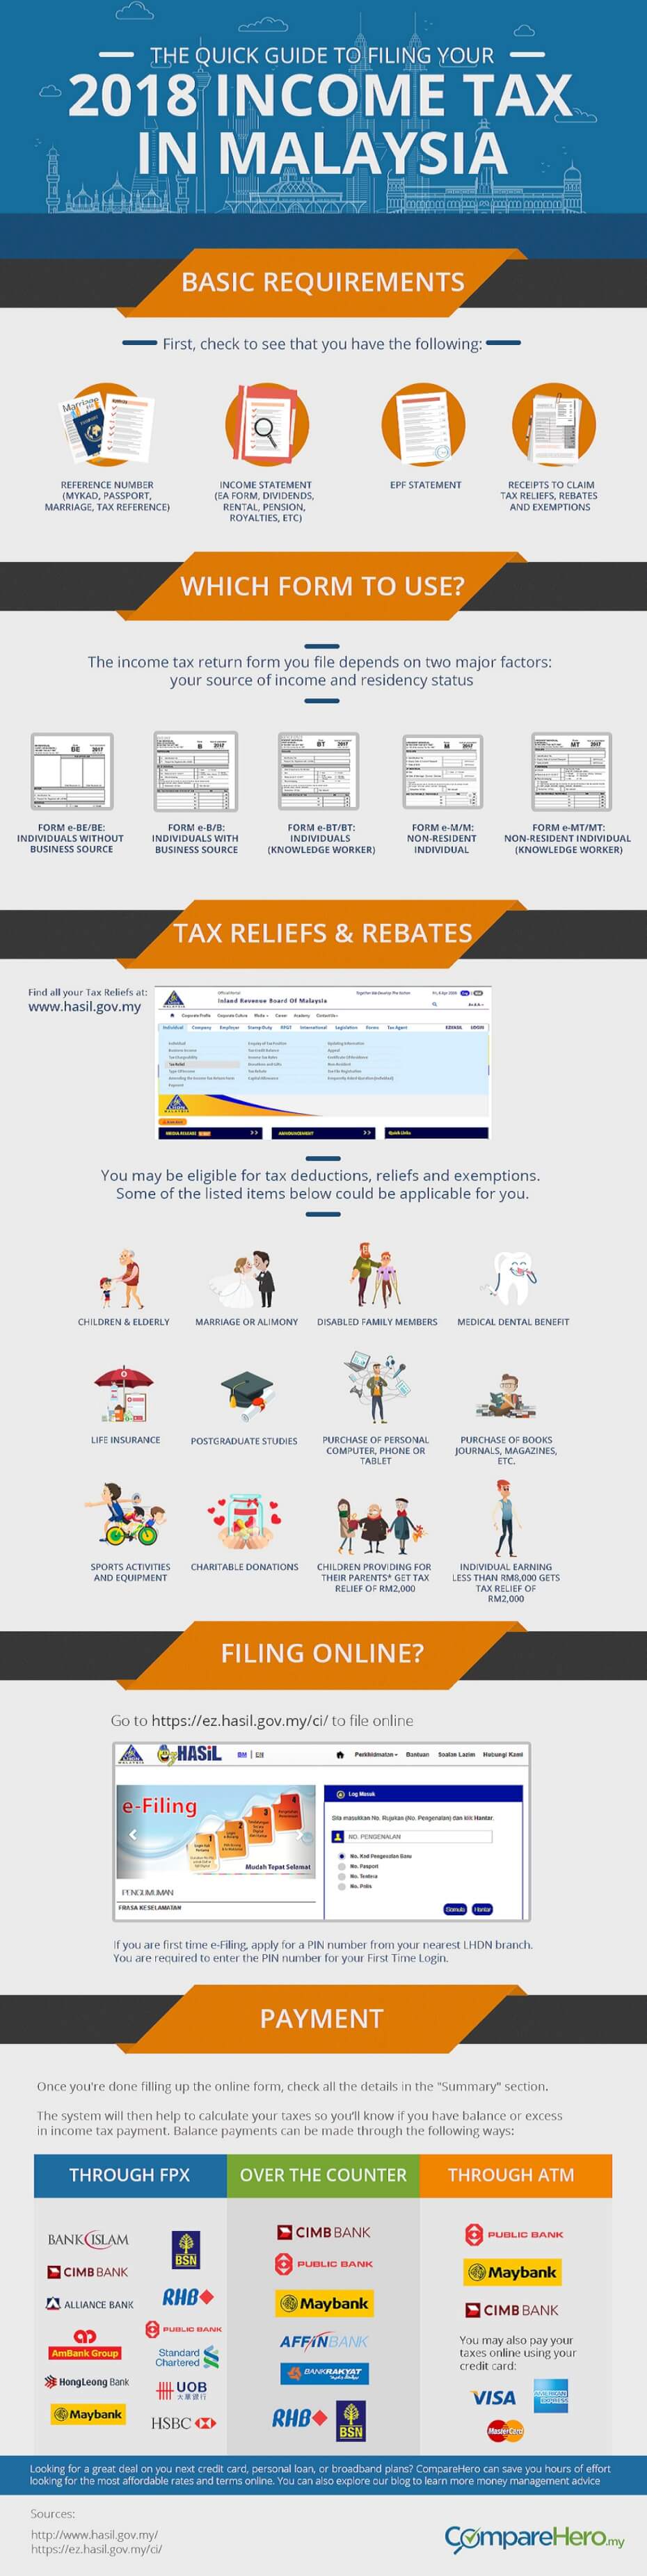 infographic complete malaysia personal income tax guide 2018